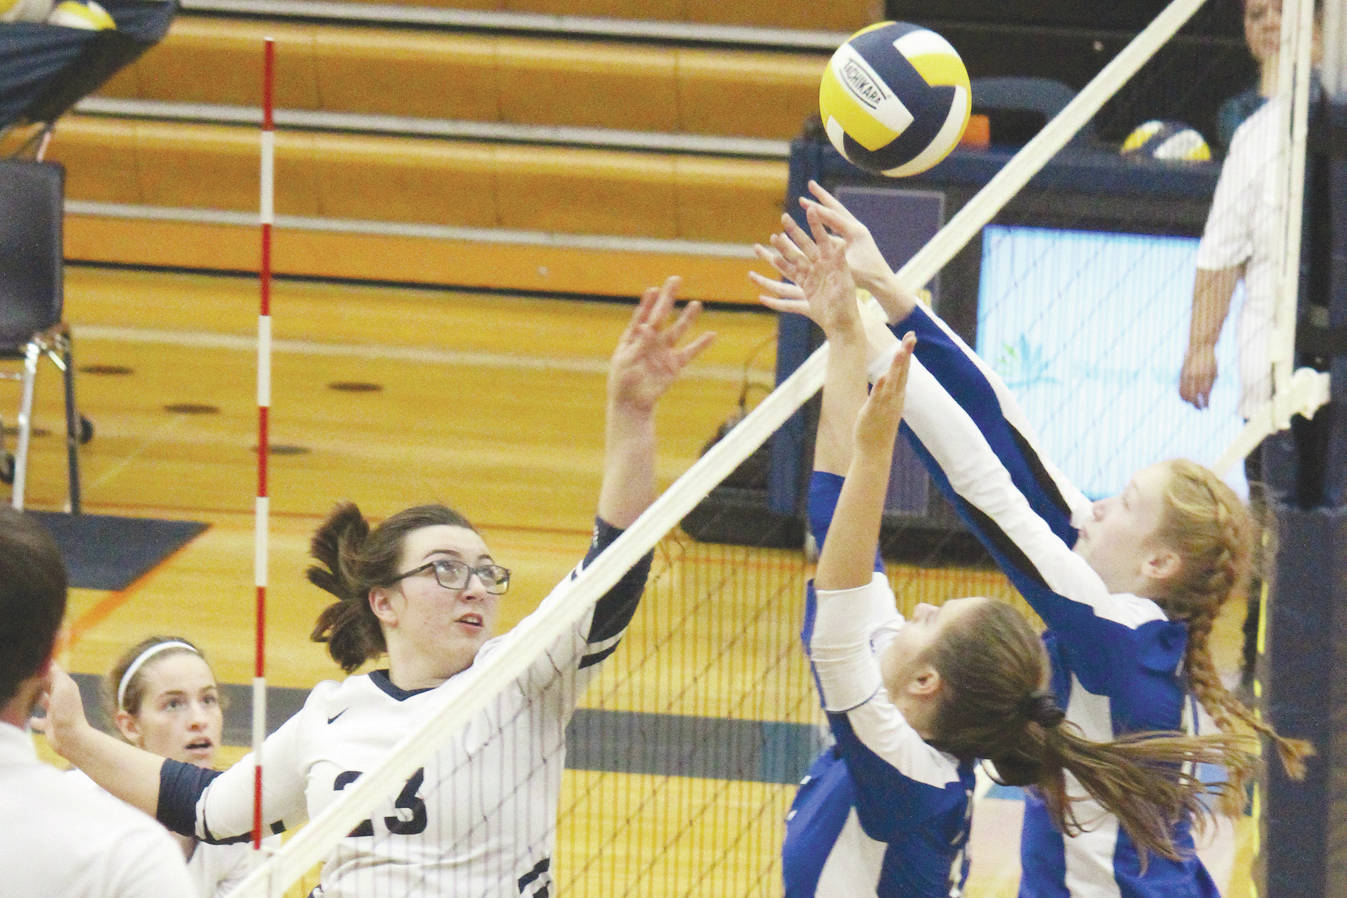 Palmer’s Kristen Beames (center) and Carli Bowen (right) jump to block a tip from Homer’s Tonda Smude during a Thursday, Sept. 12, 2019 volleyball game in the Alive Witte Gymnasium in Homer, Alaska. (Photo by Megan Pacer/Homer News)